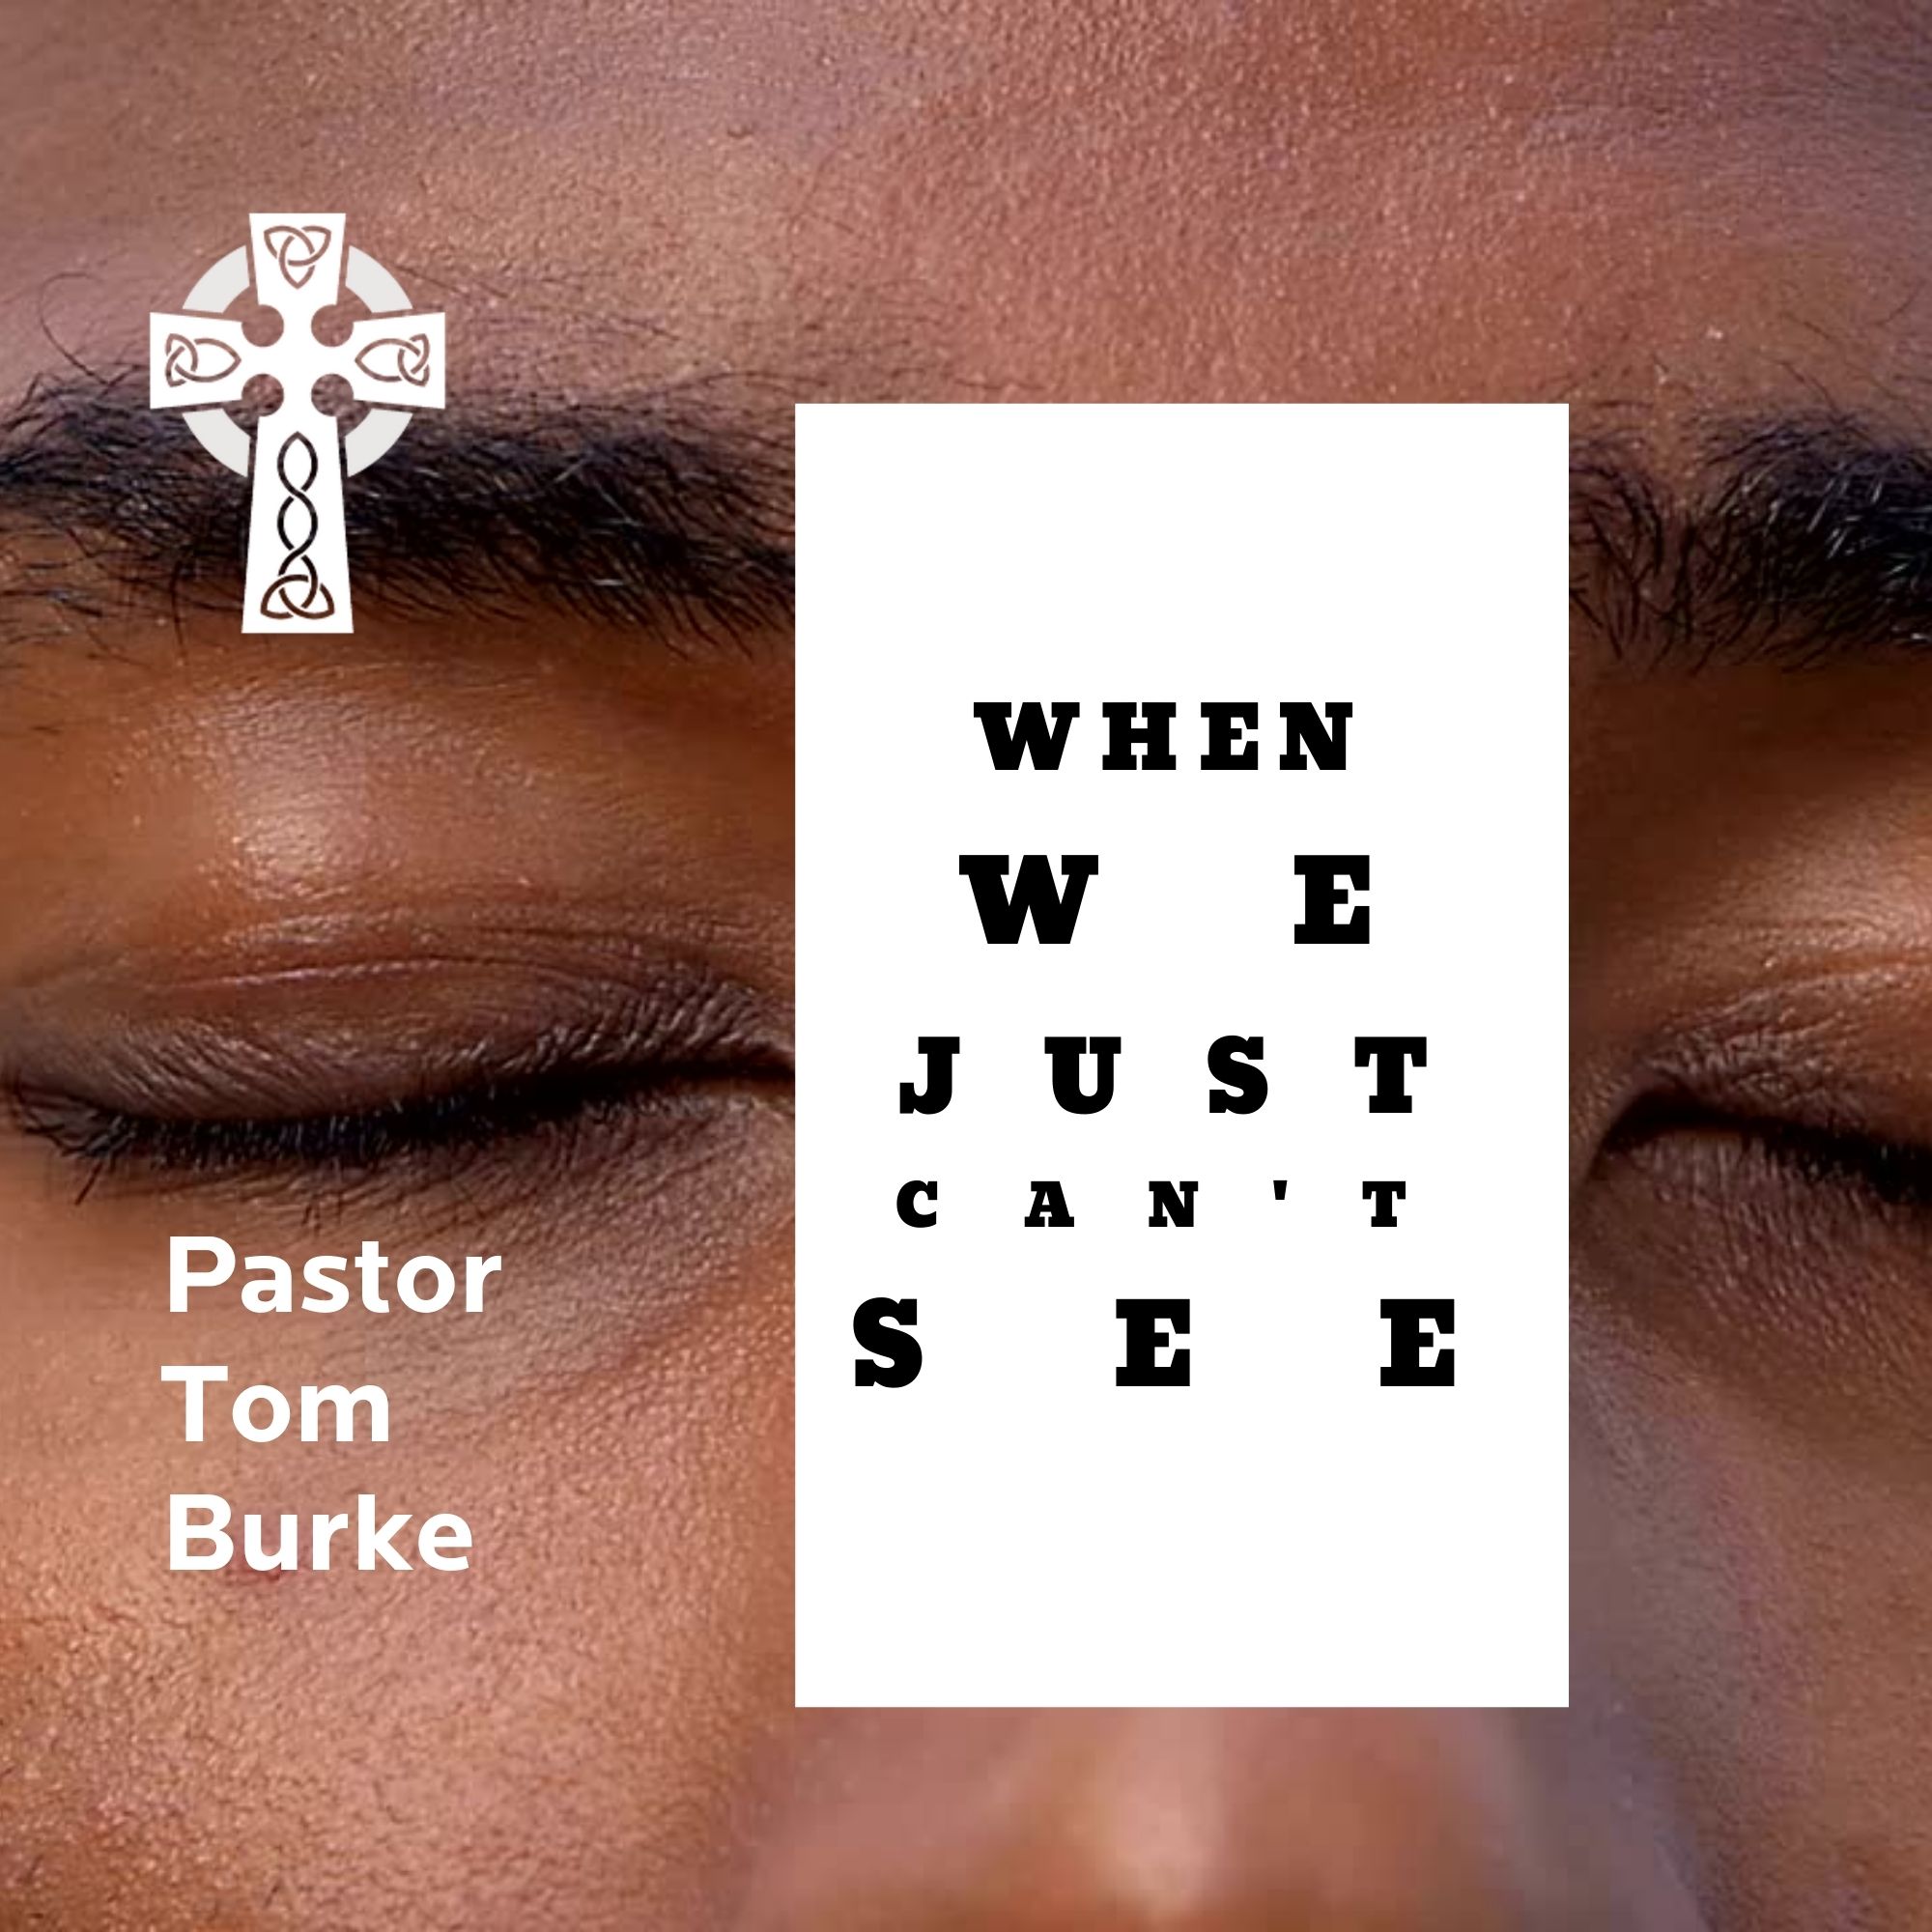 When We Just Can't See - Pastor Tom Burke